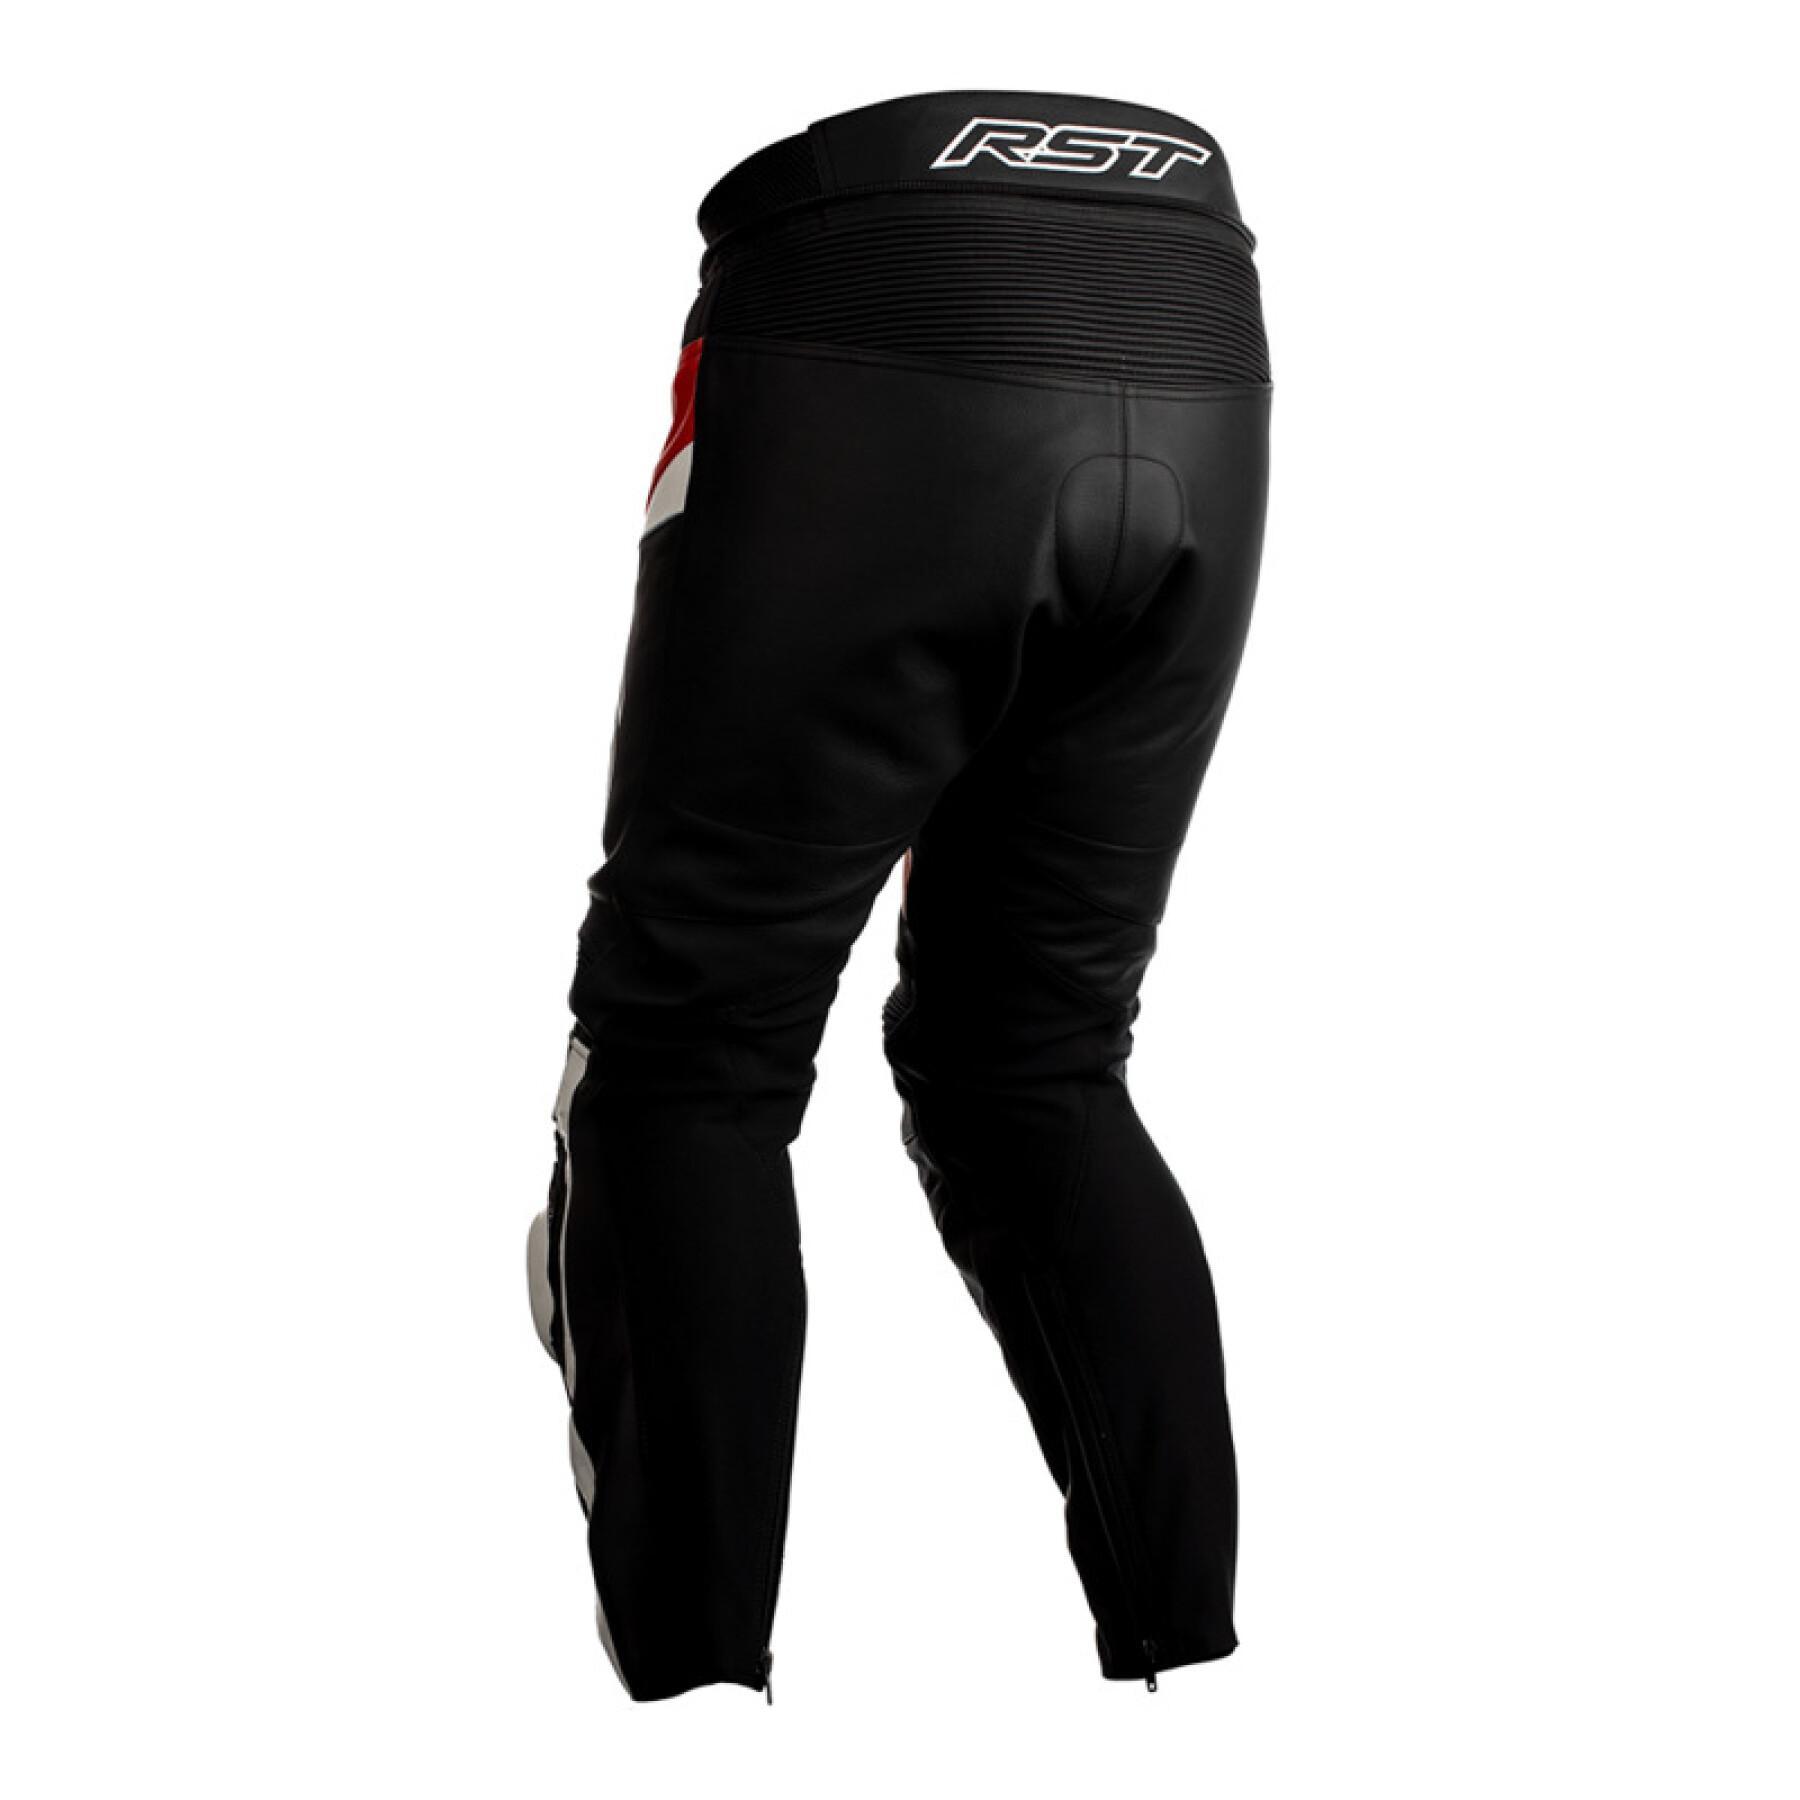 Leather motorcycle pants RST Tractech EVO 4 CE